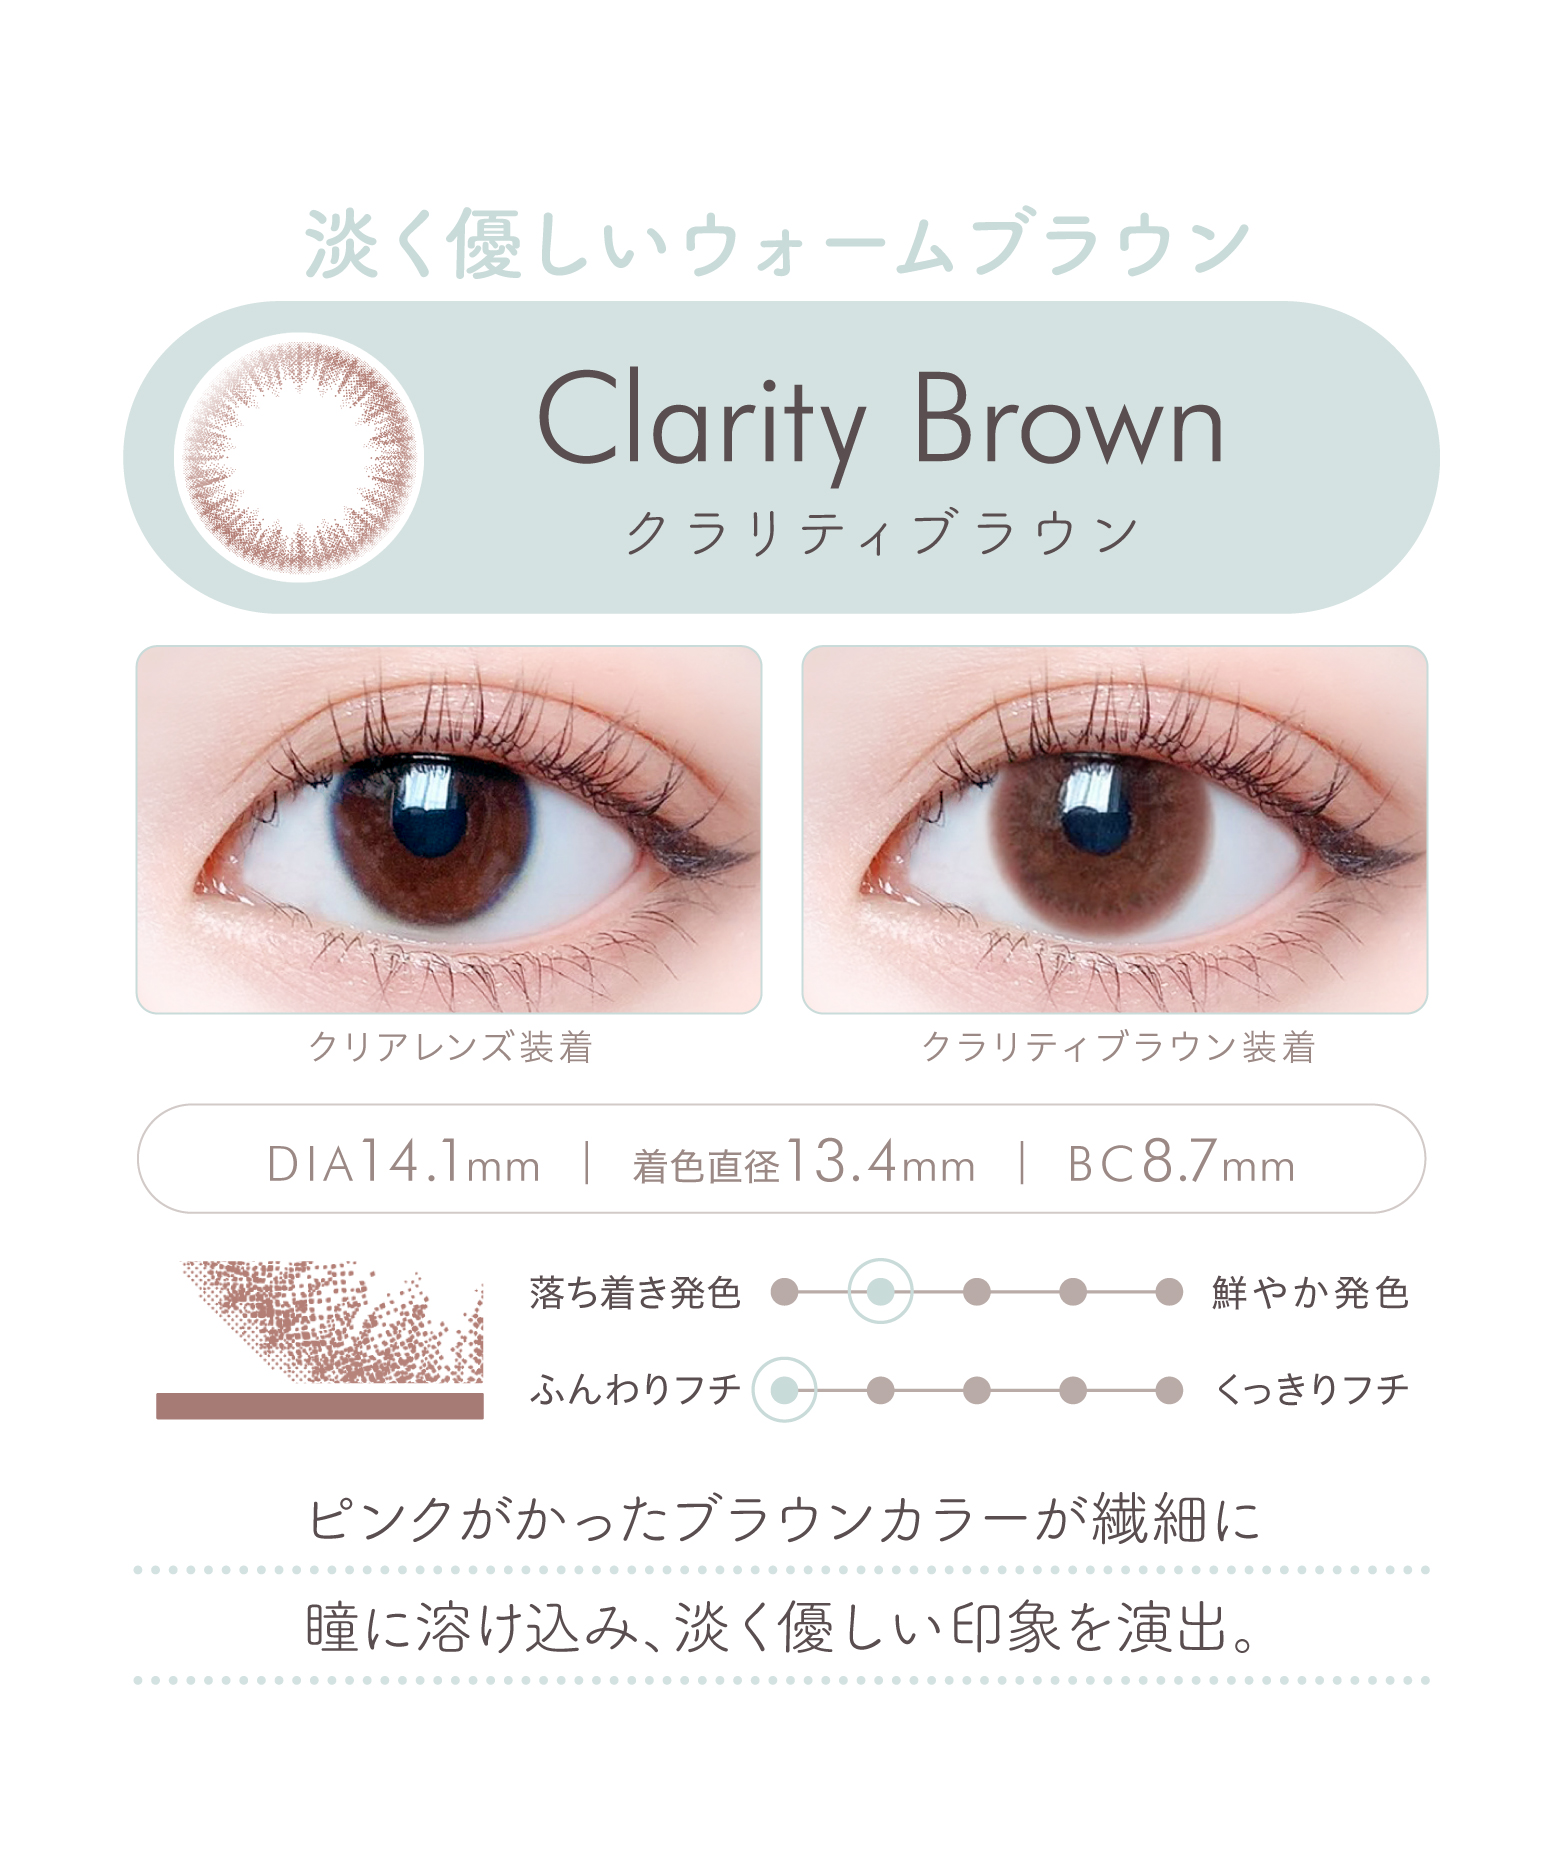 Clarity Brown